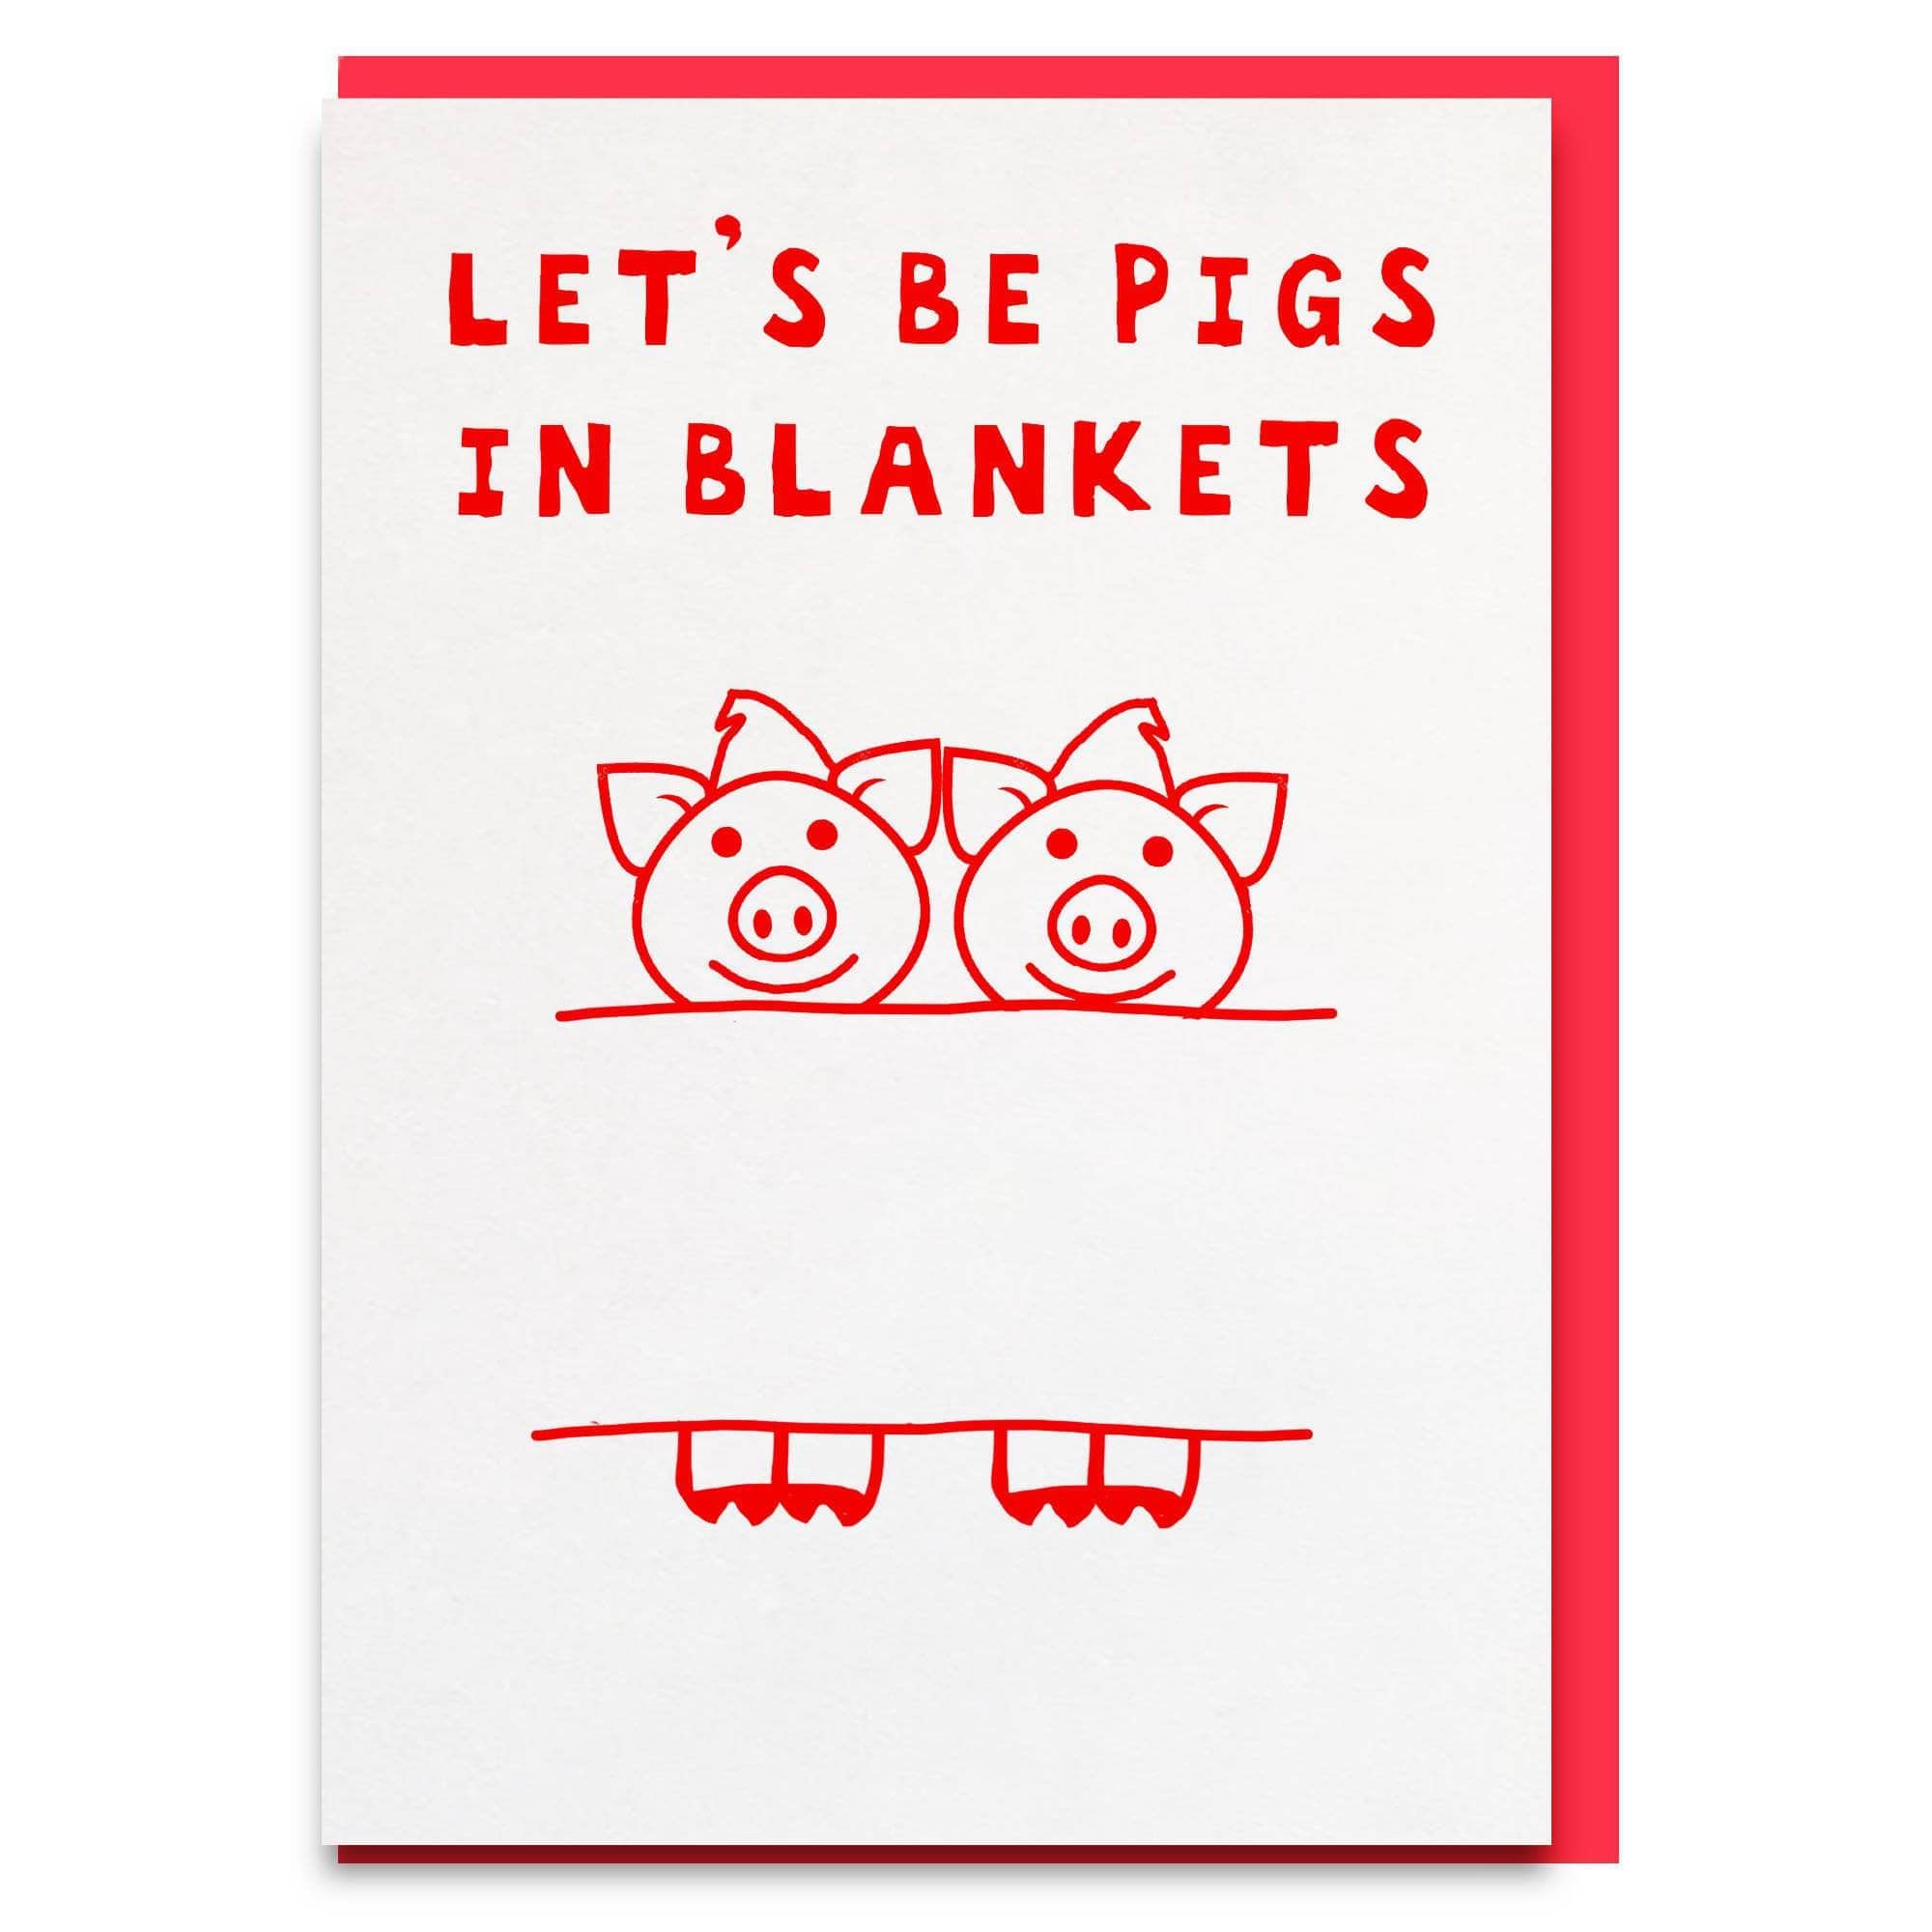 Pigs in blankets!